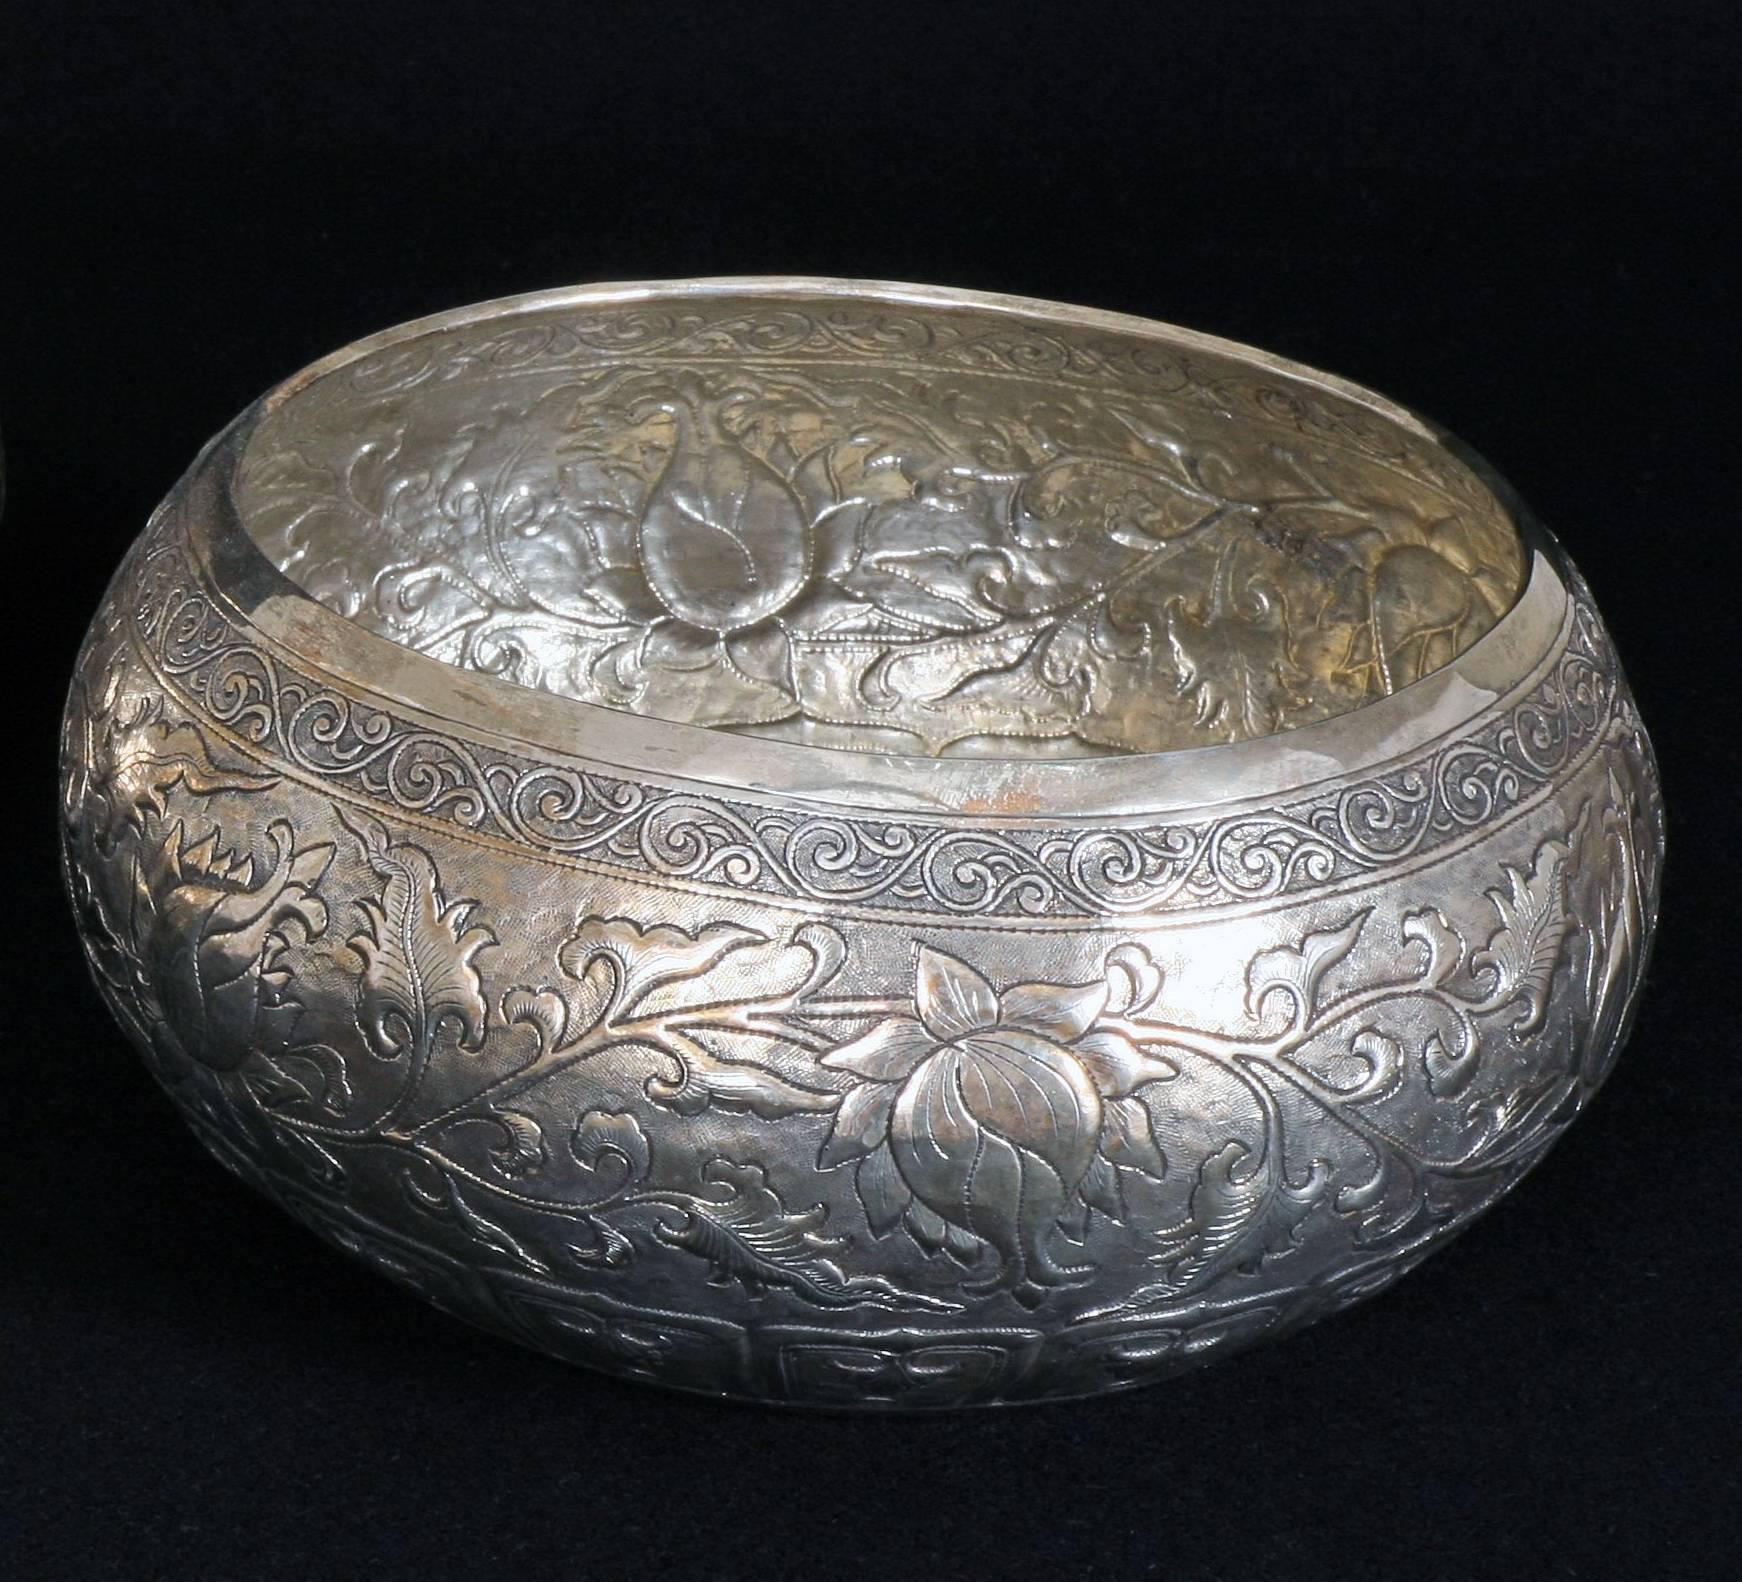 The fine hand-worked solid silver bowl is meticulously chased with classic Chinese floral motif. It is available in other sizes.
The silver is 90% pure.